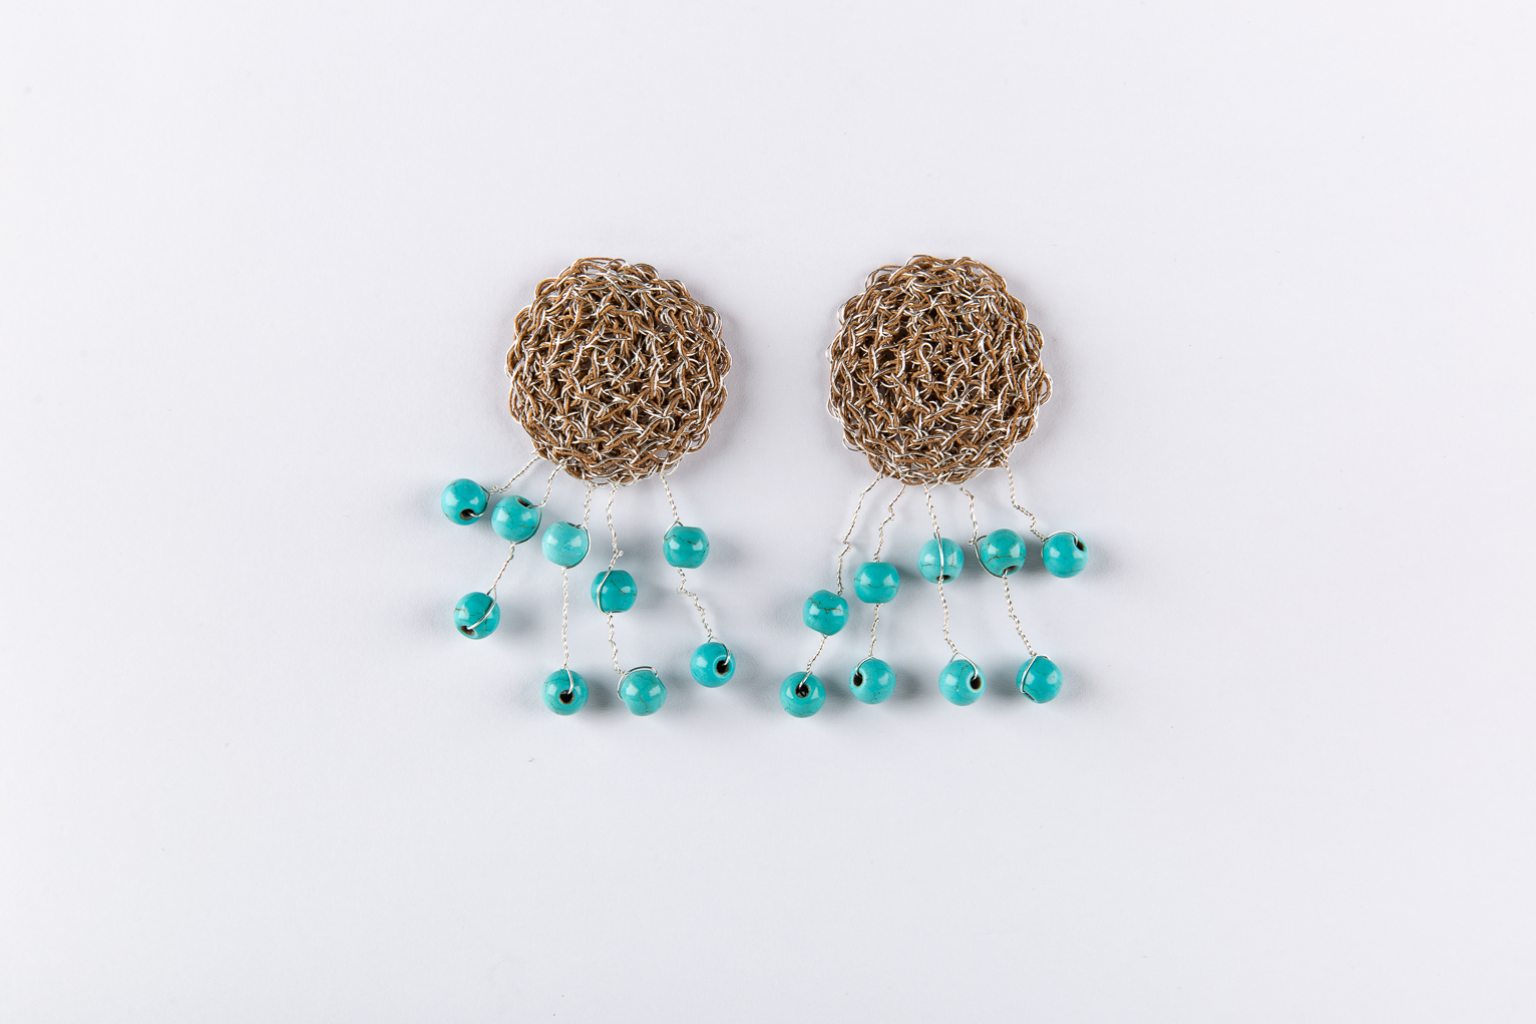 Handknitted turquoise earrings